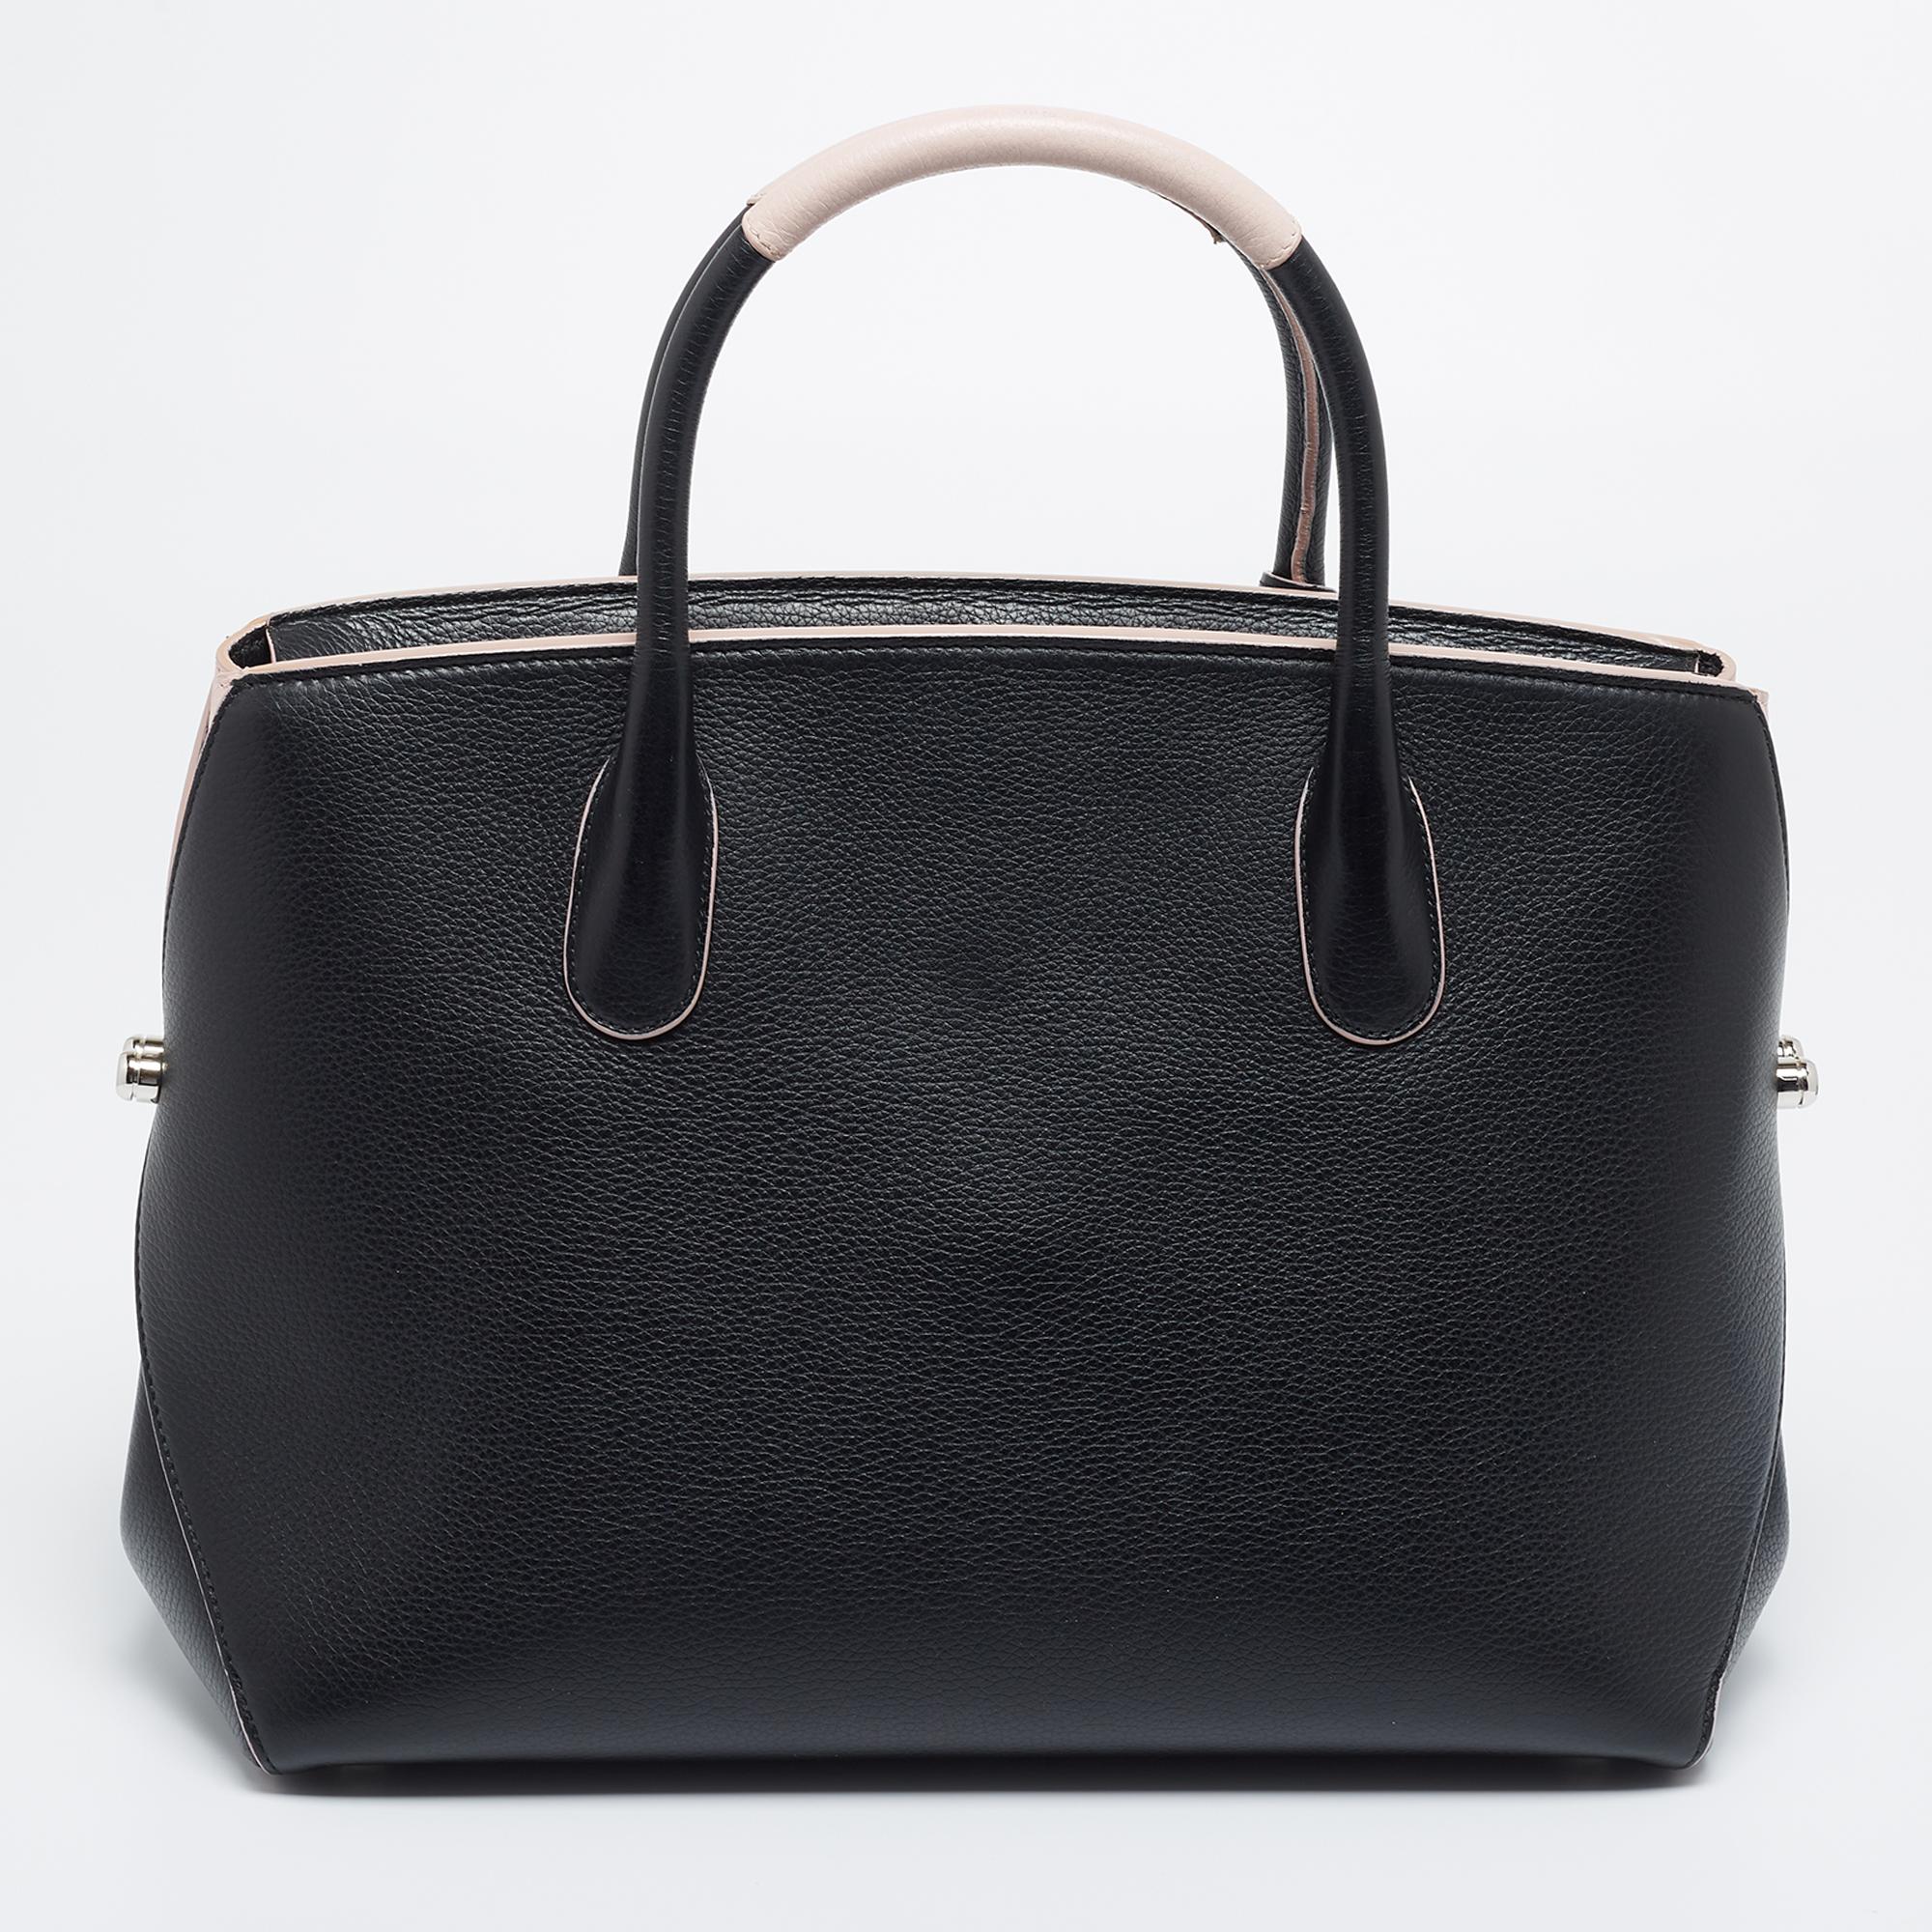 The sculptural silhouette of this Dior Open Bar tote makes it desirable and elegant. Lined with leather, the spacious interior can perfectly accommodate your daily essentials. It can be conveniently carried with the dual handles at the top and the